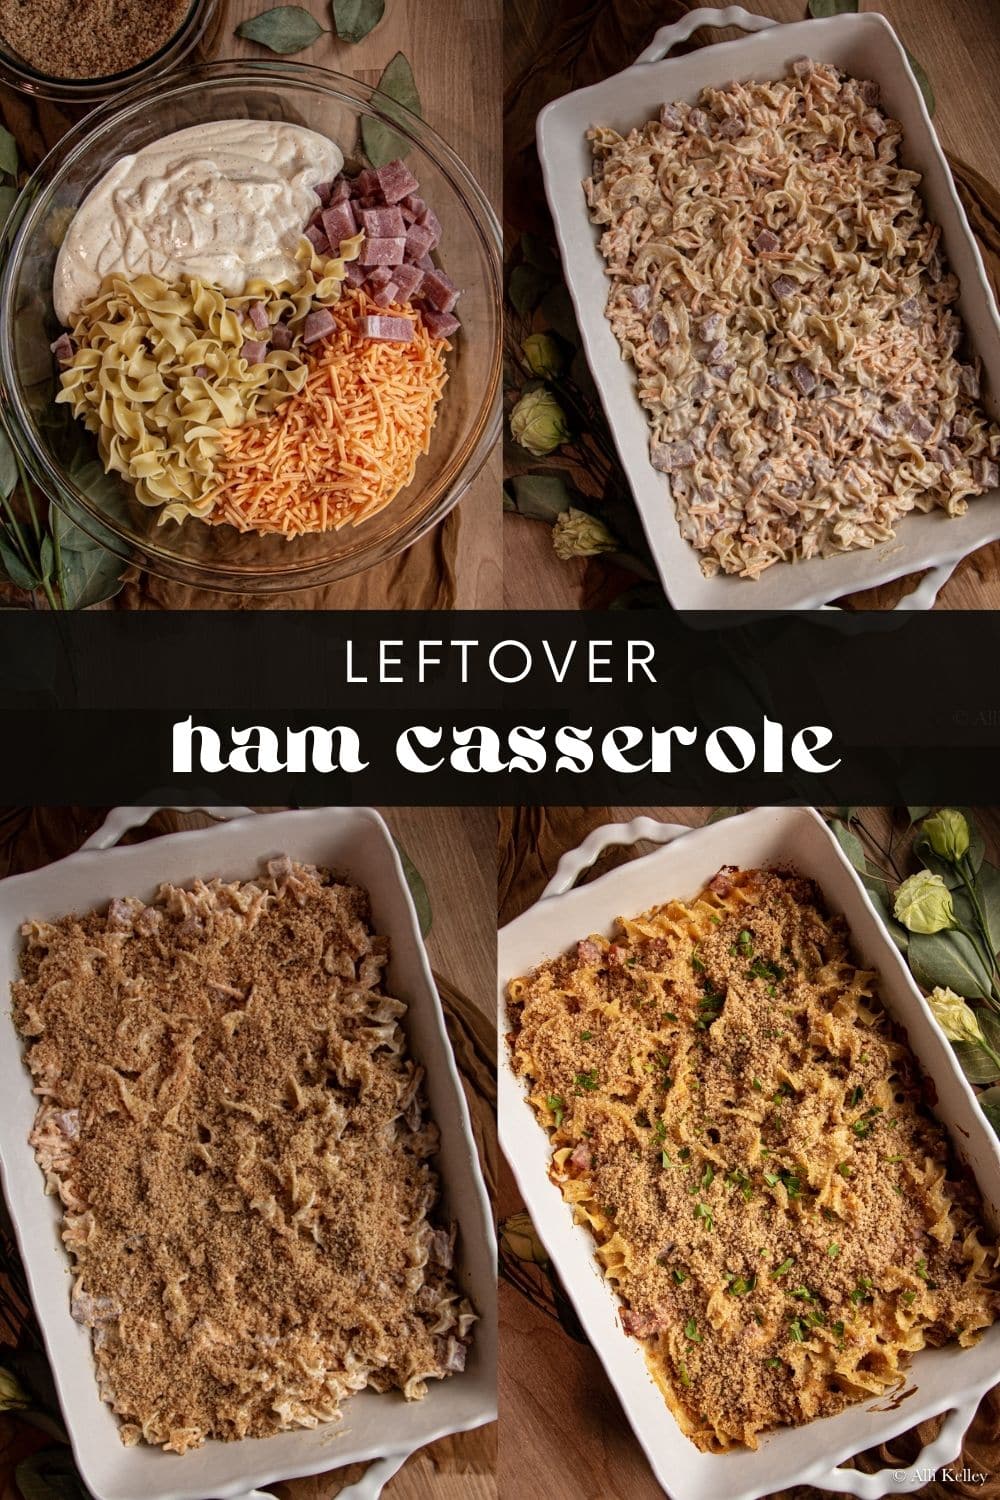 If you have some spare holiday ham or cooked ham steaks - leftover ham casserole is the perfect option for using it up! This easy recipe is a great way to add flavor and texture to your meal while ensuring nothing goes to waste. Not only that, but this delicious dish makes the best easy lunch or comforting midweek dinner.